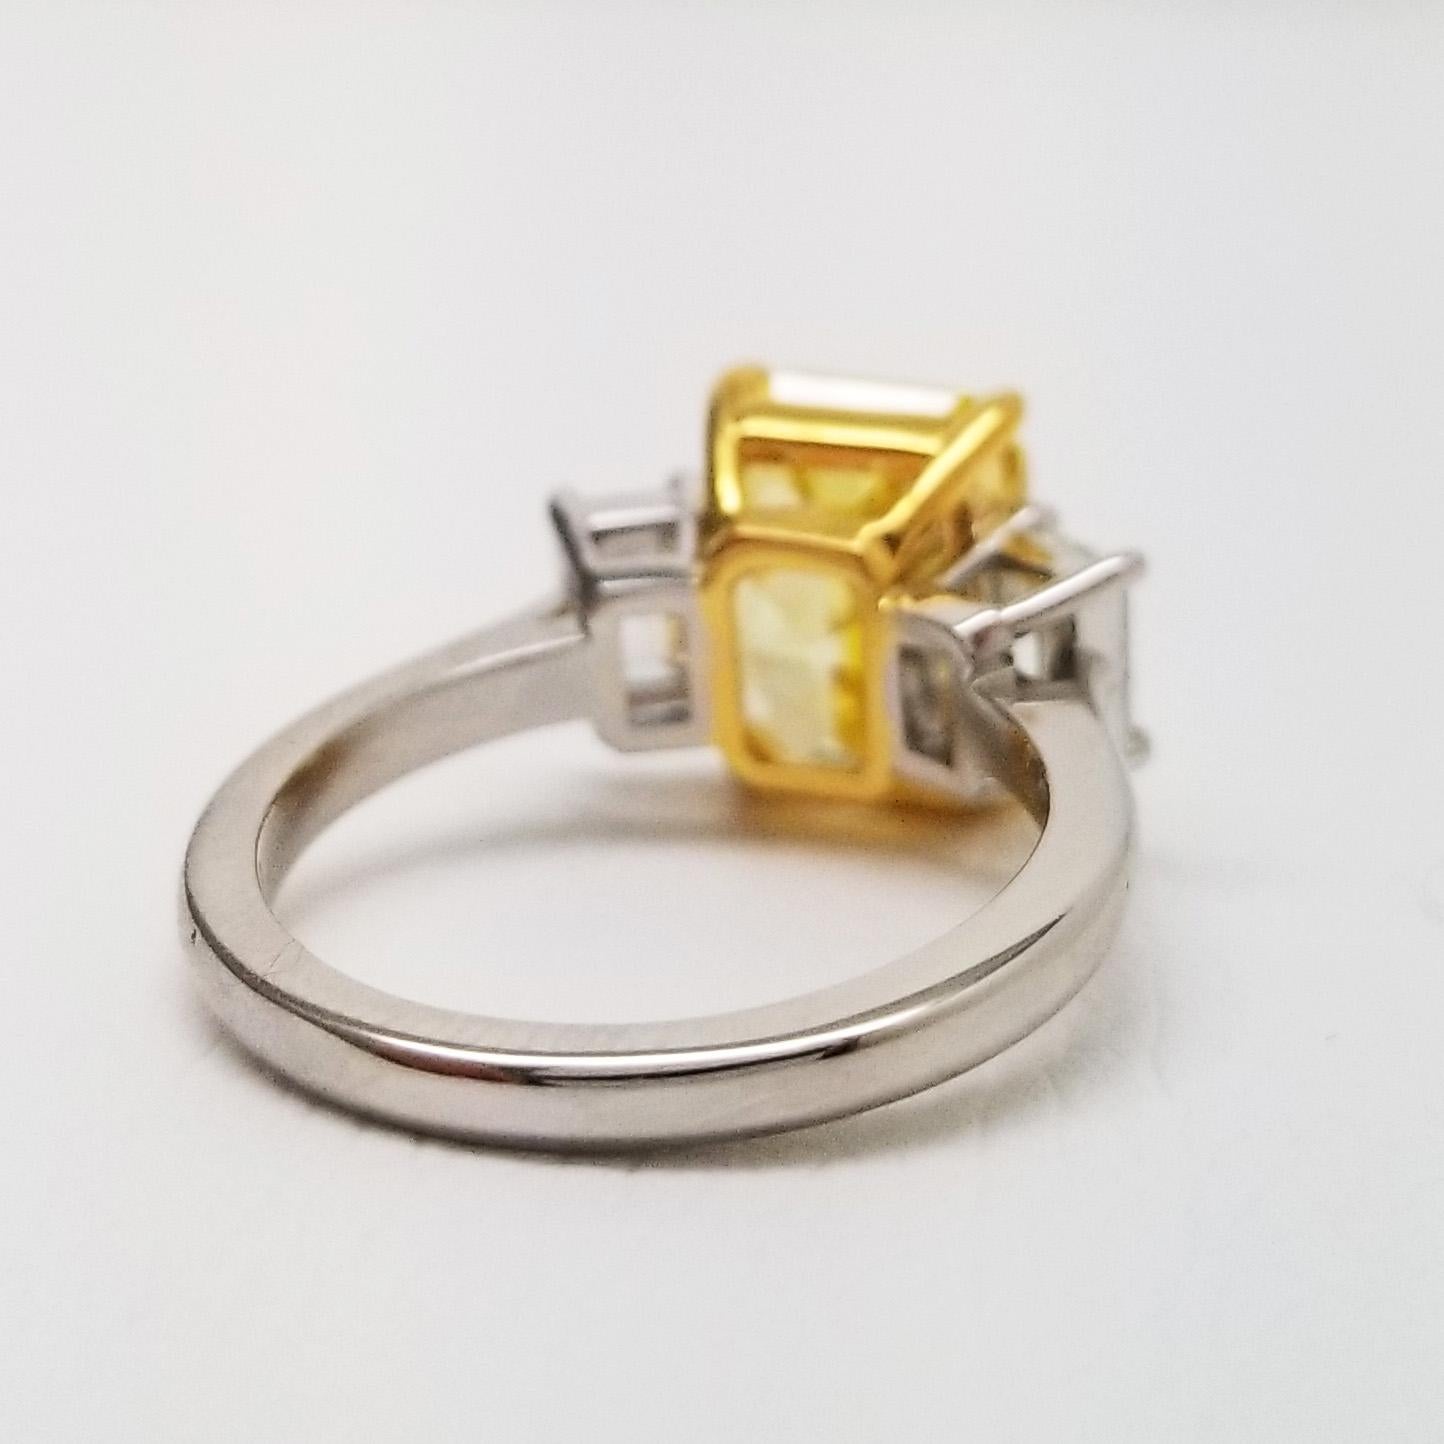 GIA certified VS1 natural fancy vivid yellow natural diamond 5.18 carat engagement ring. Emerald cut 3 Stone engagement ring with fancy vivid yellow diamond GIA 5.18 ct VS1 center stone from Scarselli.

An elegant three-stone engagement ring –